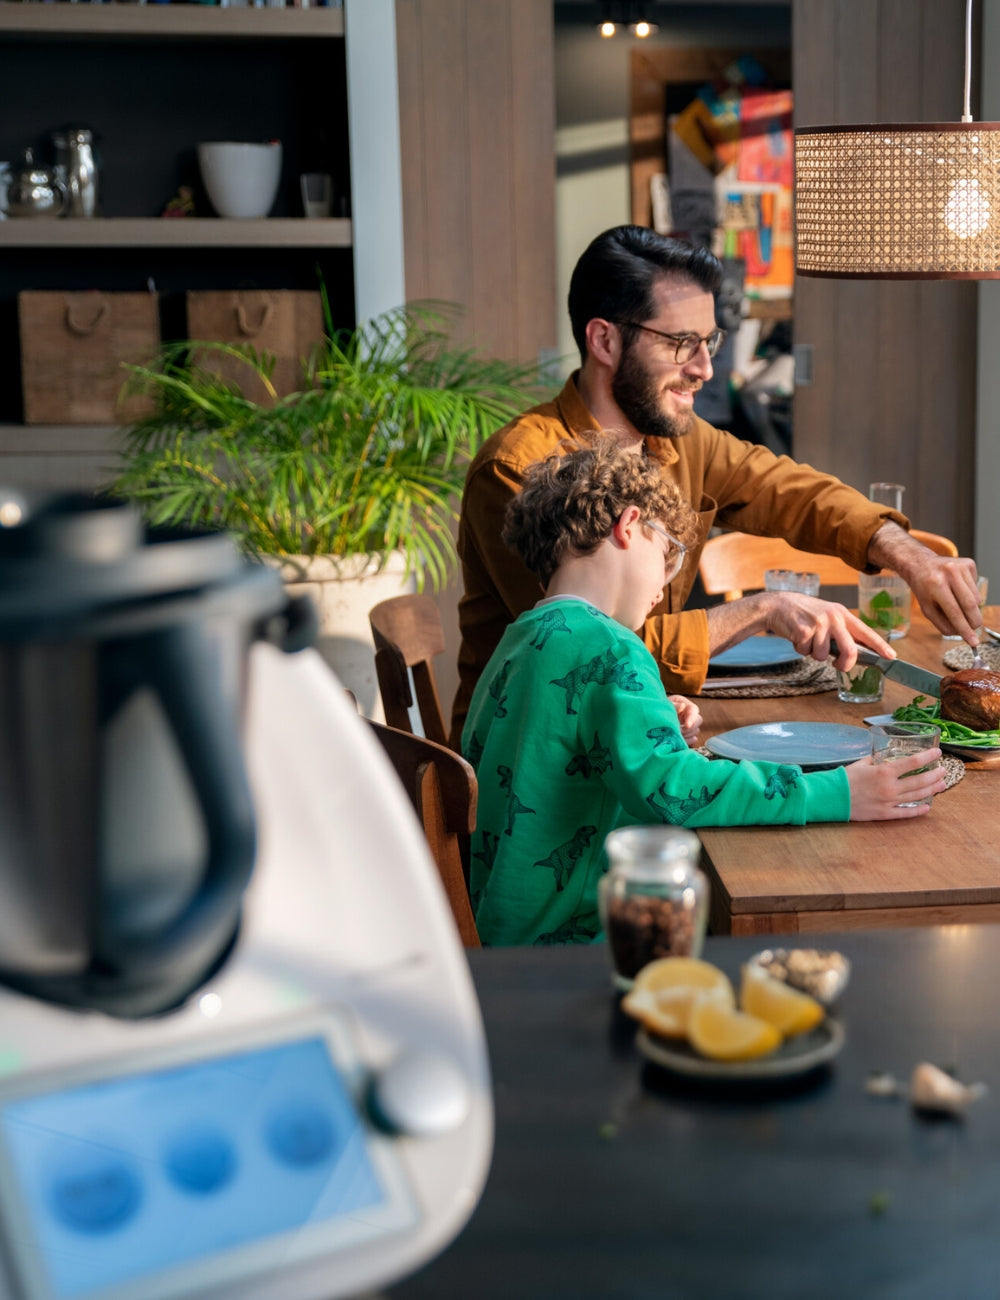 Meet The Working Dads and Superheroes of Thermomix®